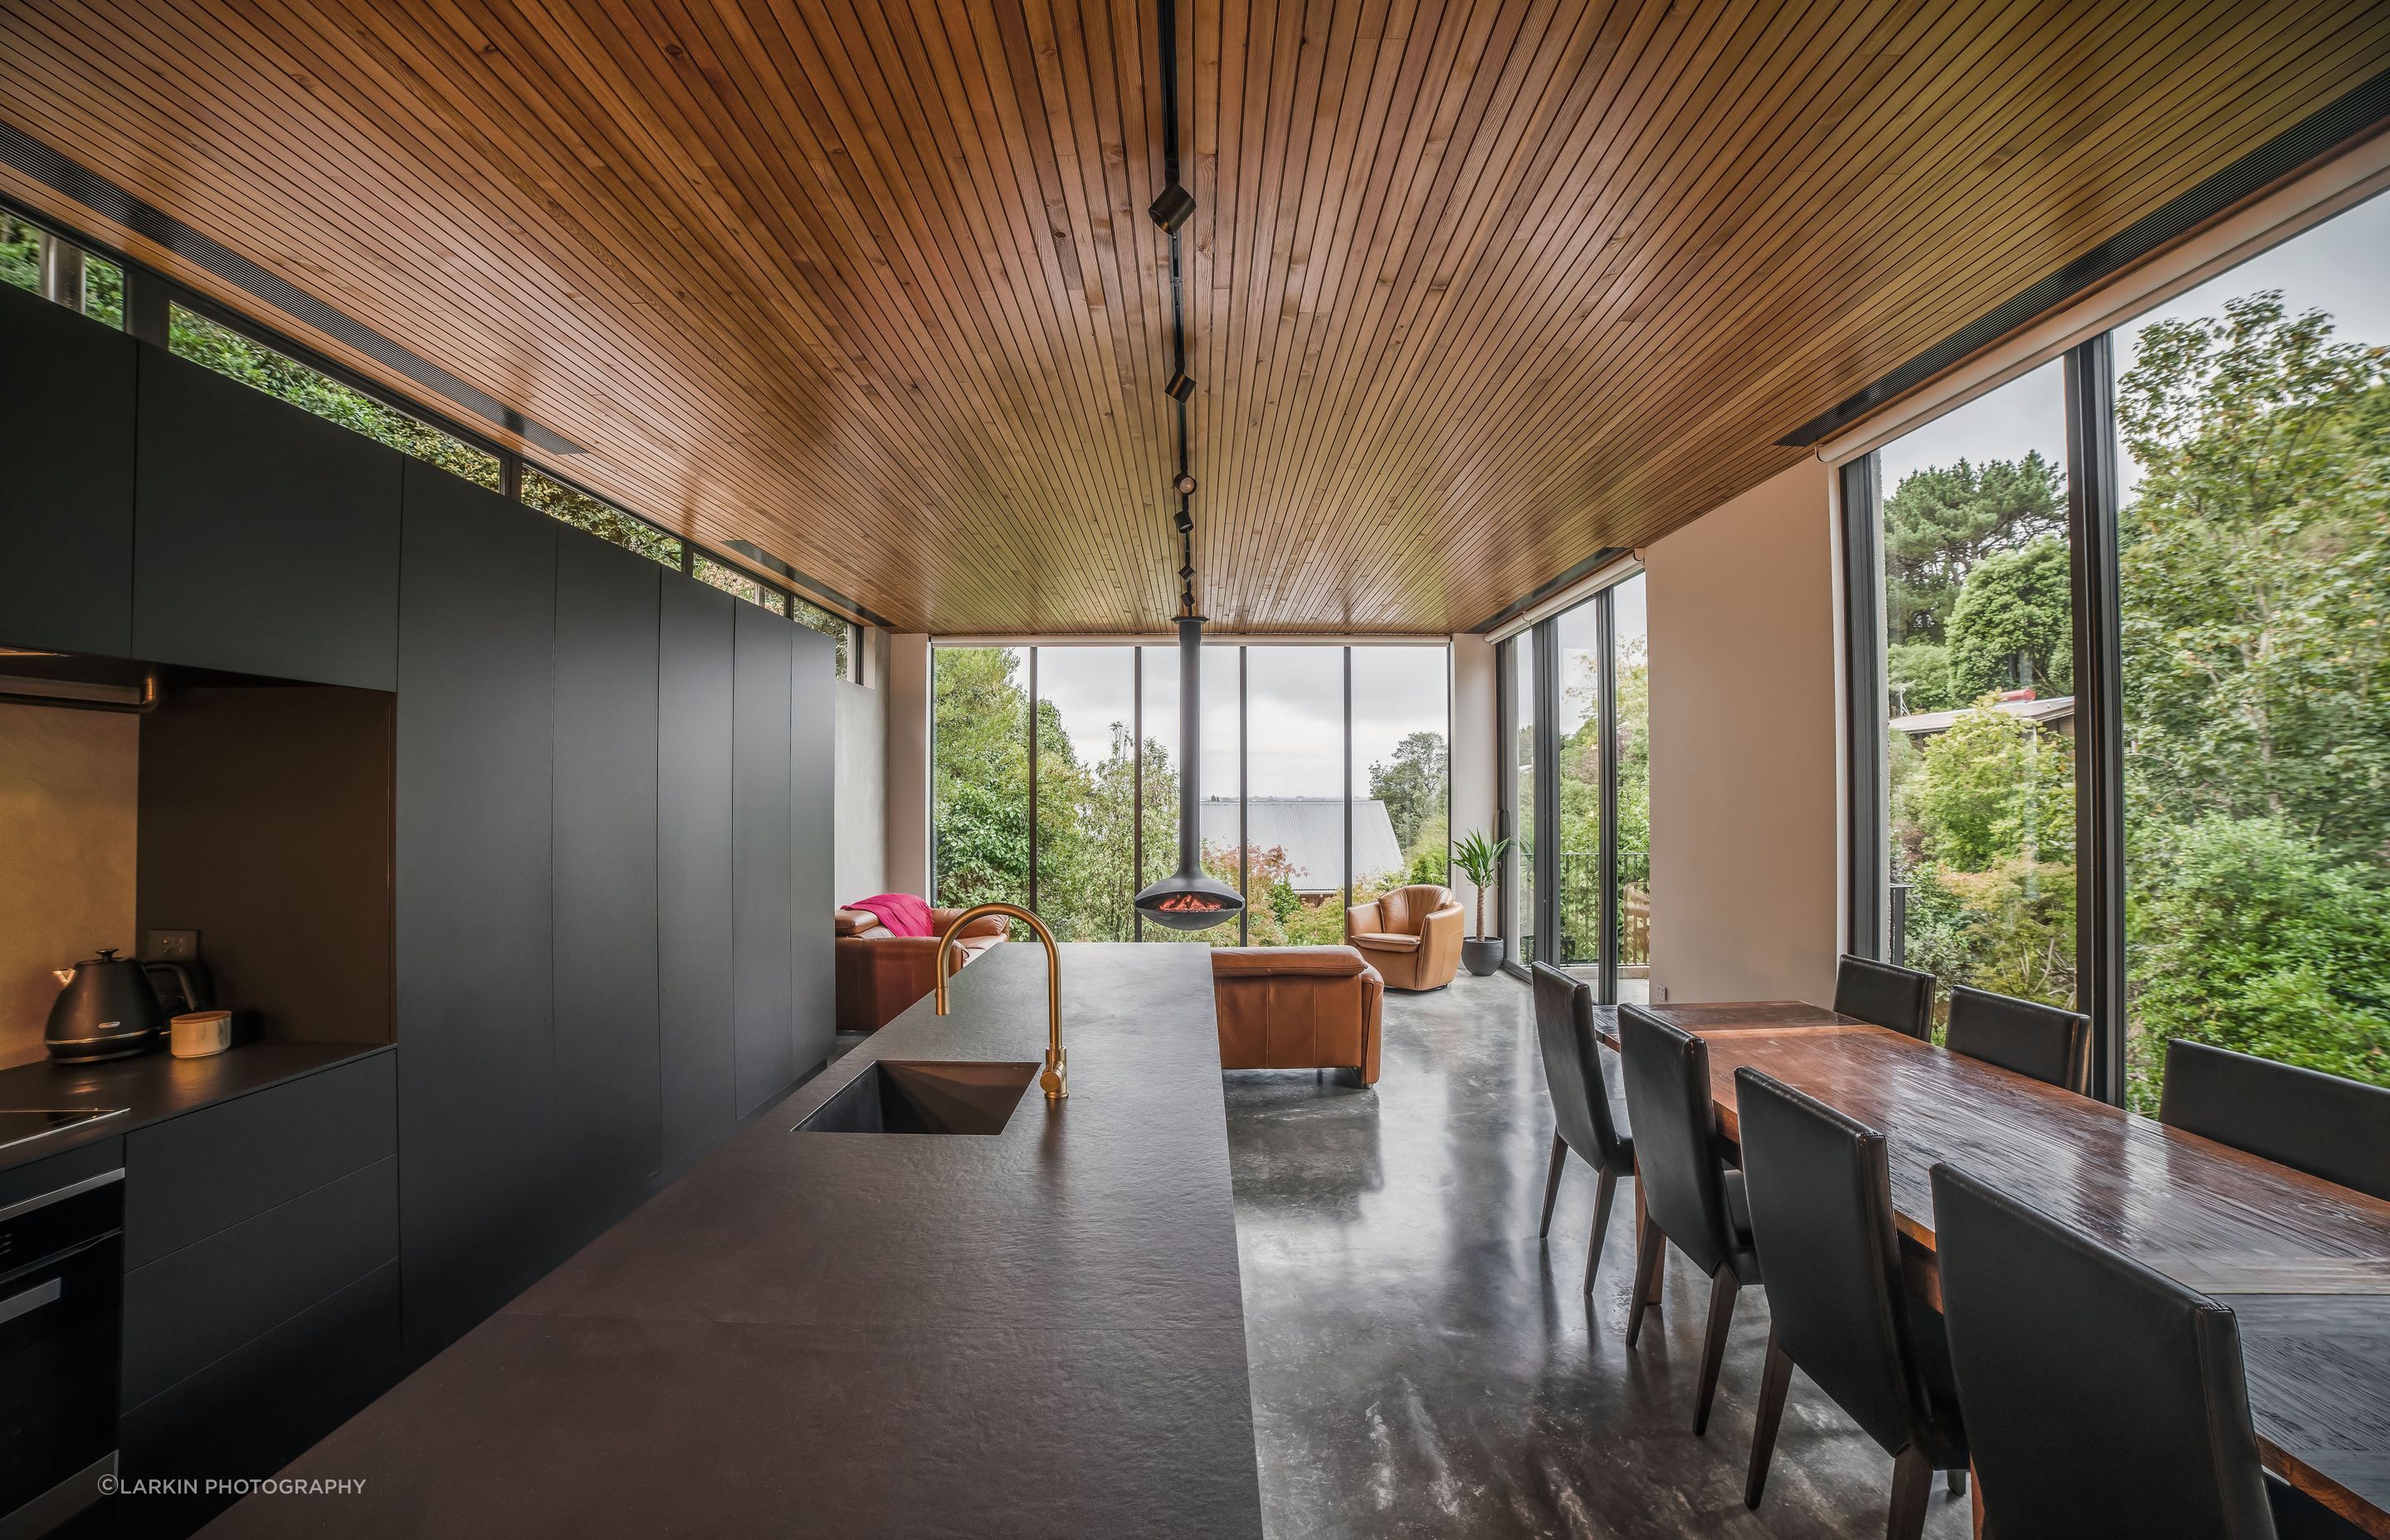 Upstairs, full-height glazing creates the experience of sitting amongst the treetops.